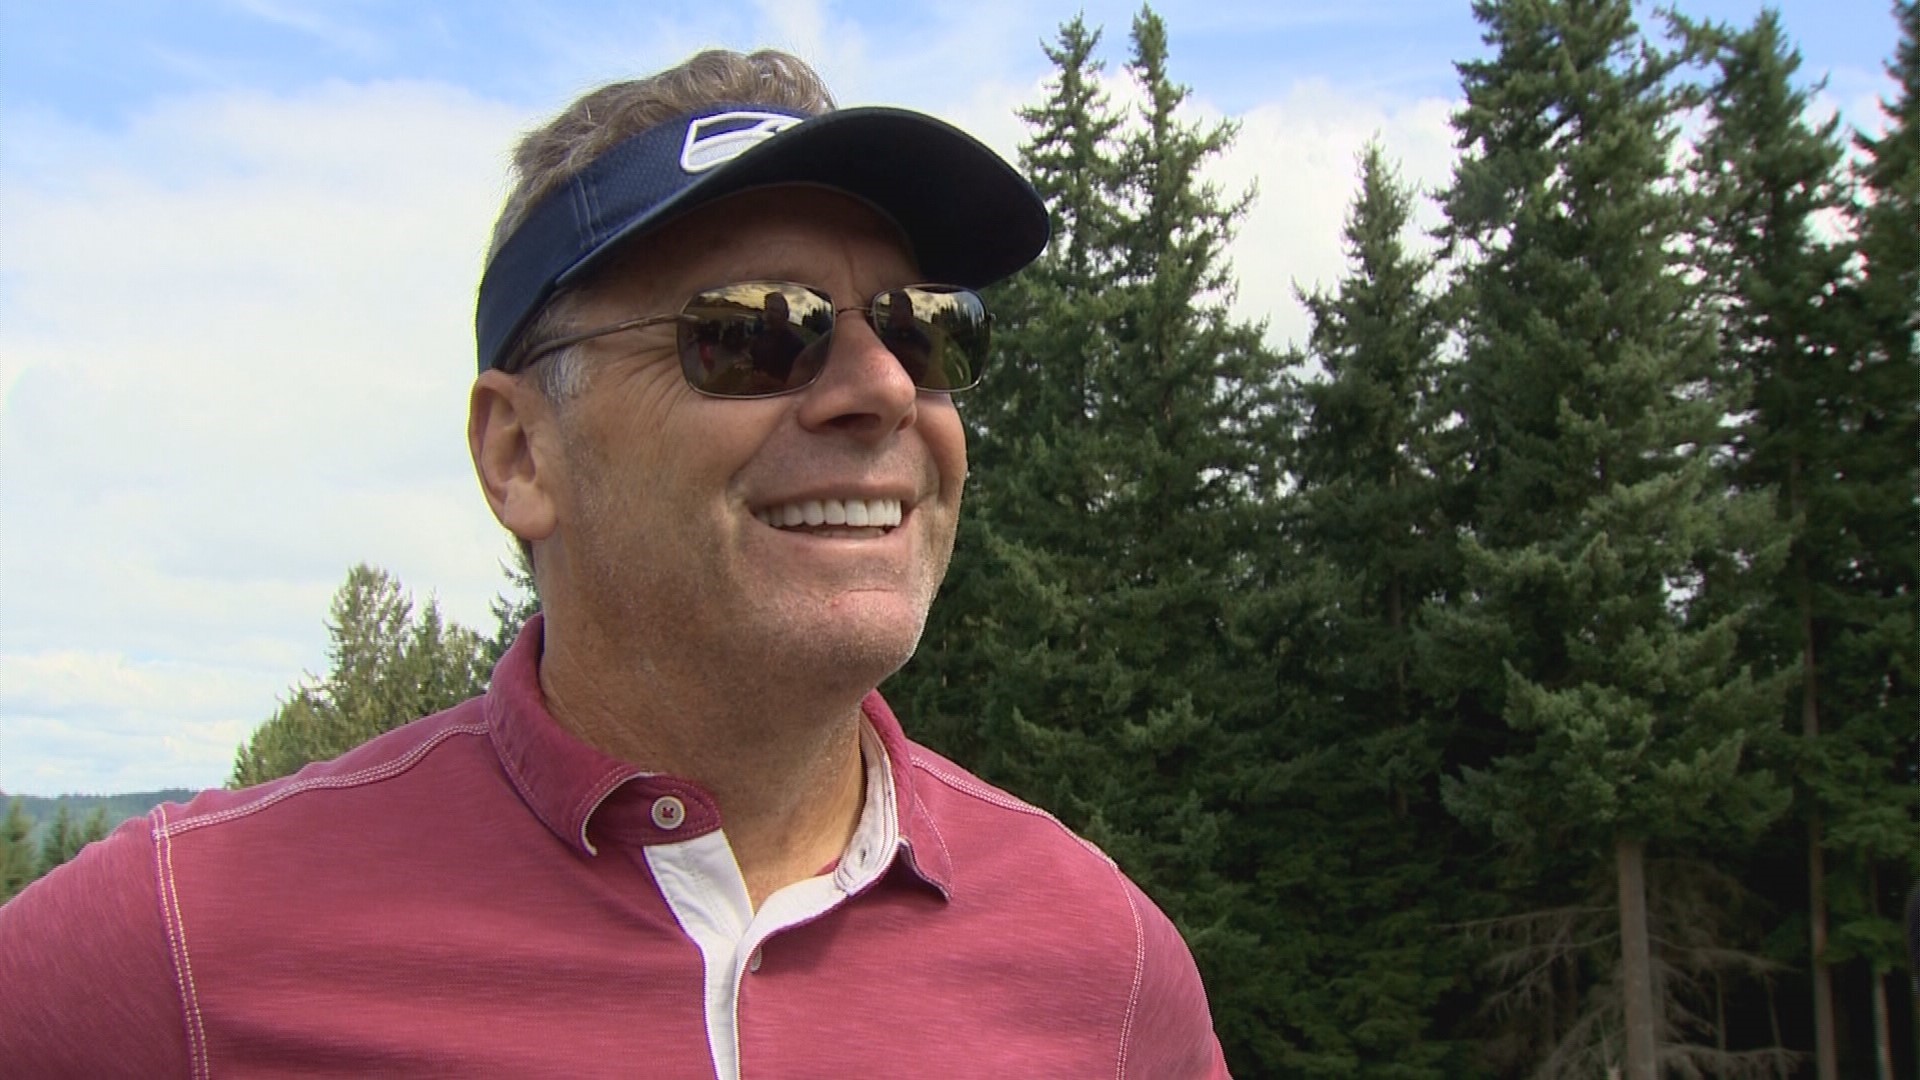 Seahawks legends Lofa Tatupu, Steve Largent, and Jim Zorn compete in a game of golf for a good cause. Sponsored by the Boeing Classic.